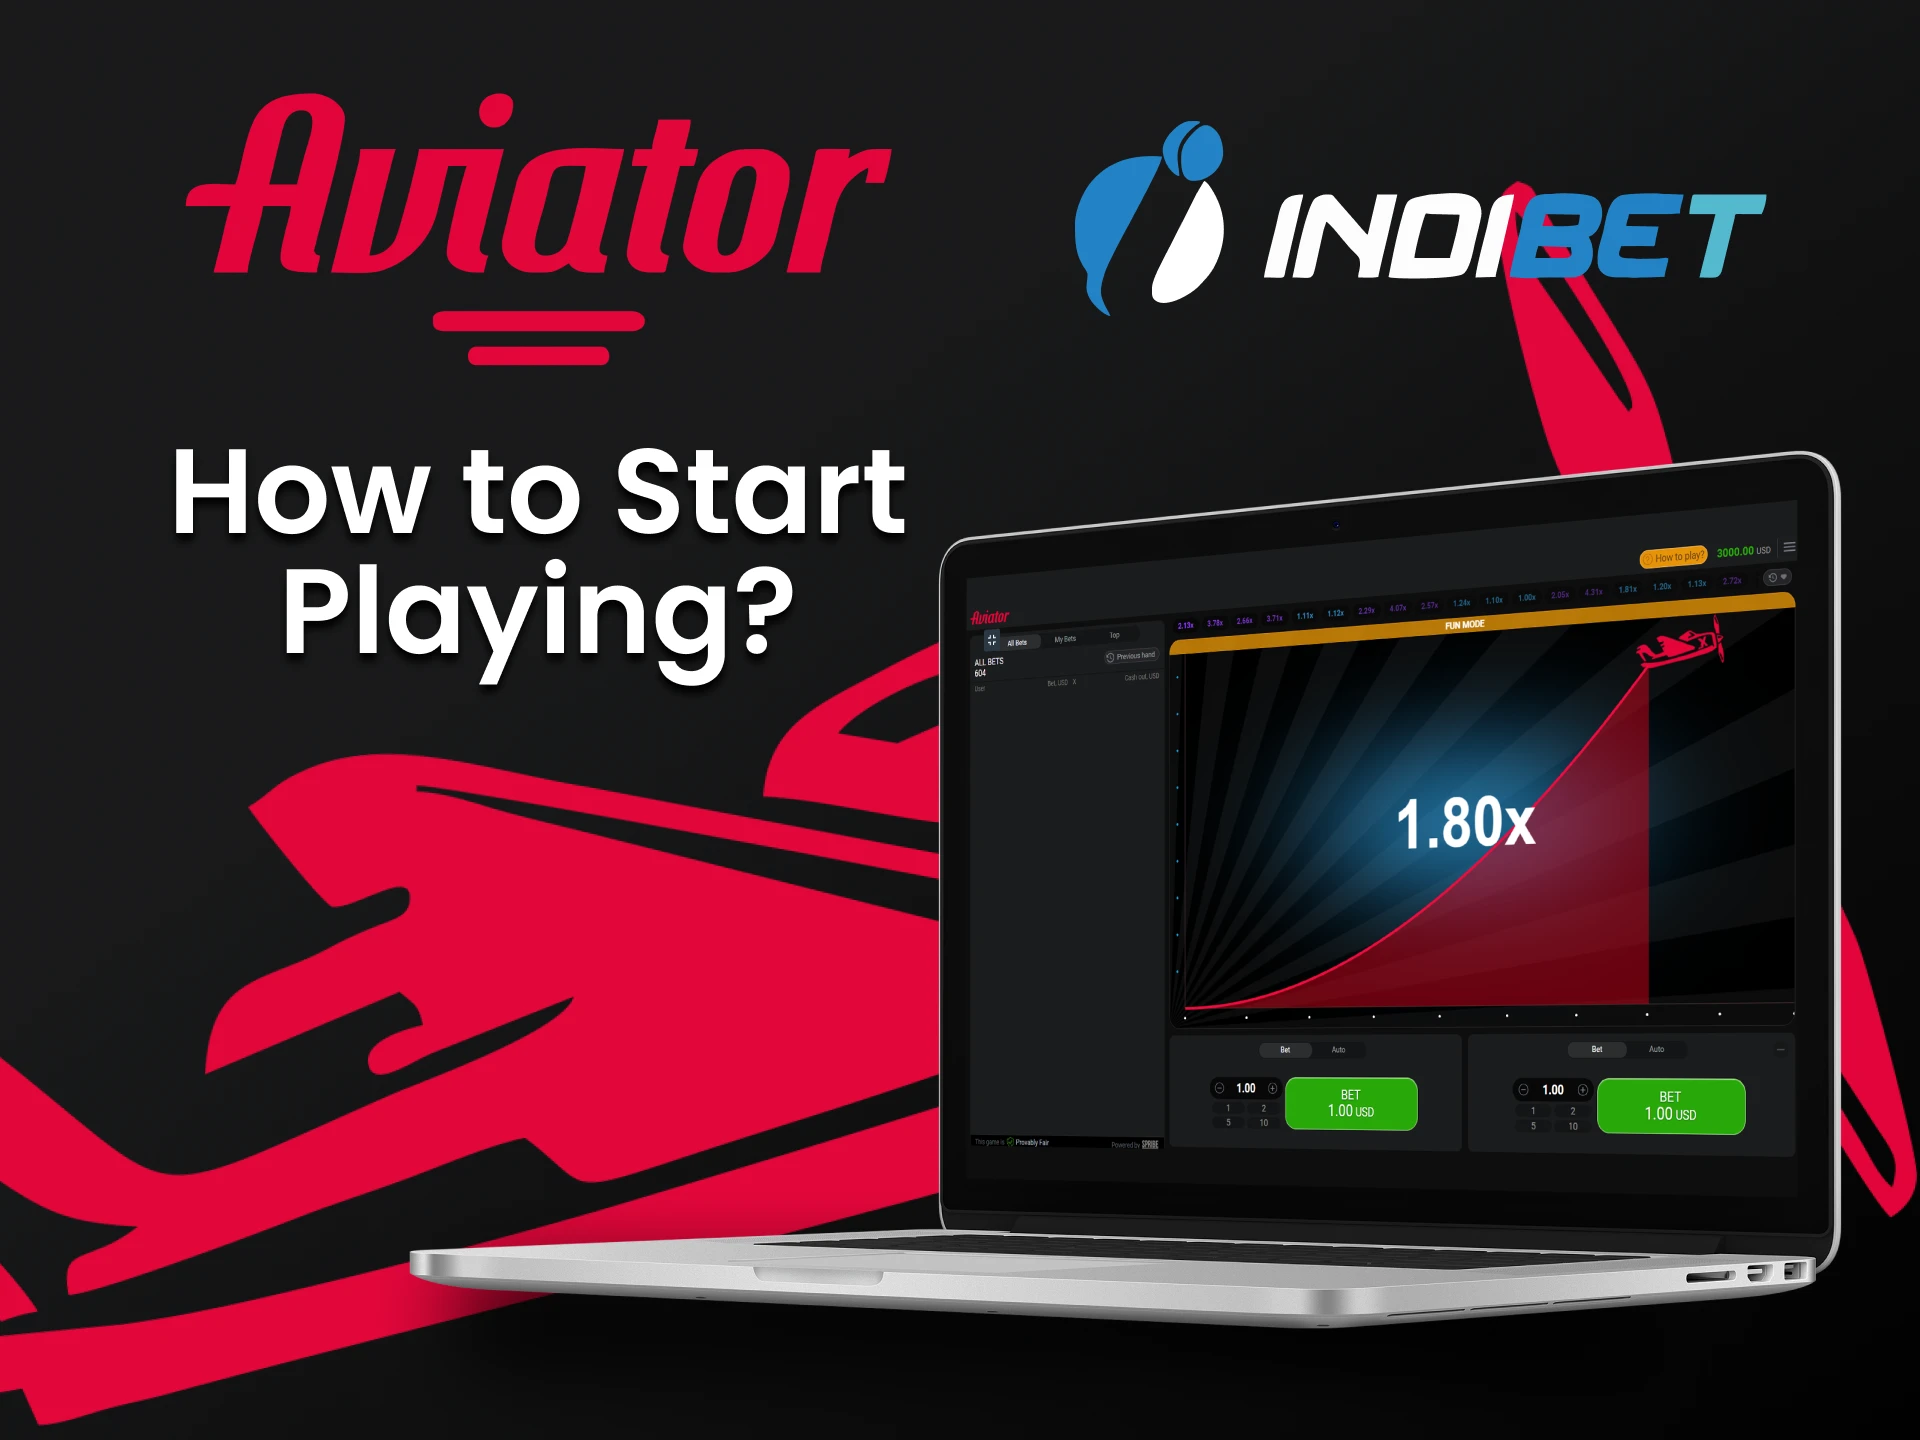 Go to the Indibet games section to play Aviator.